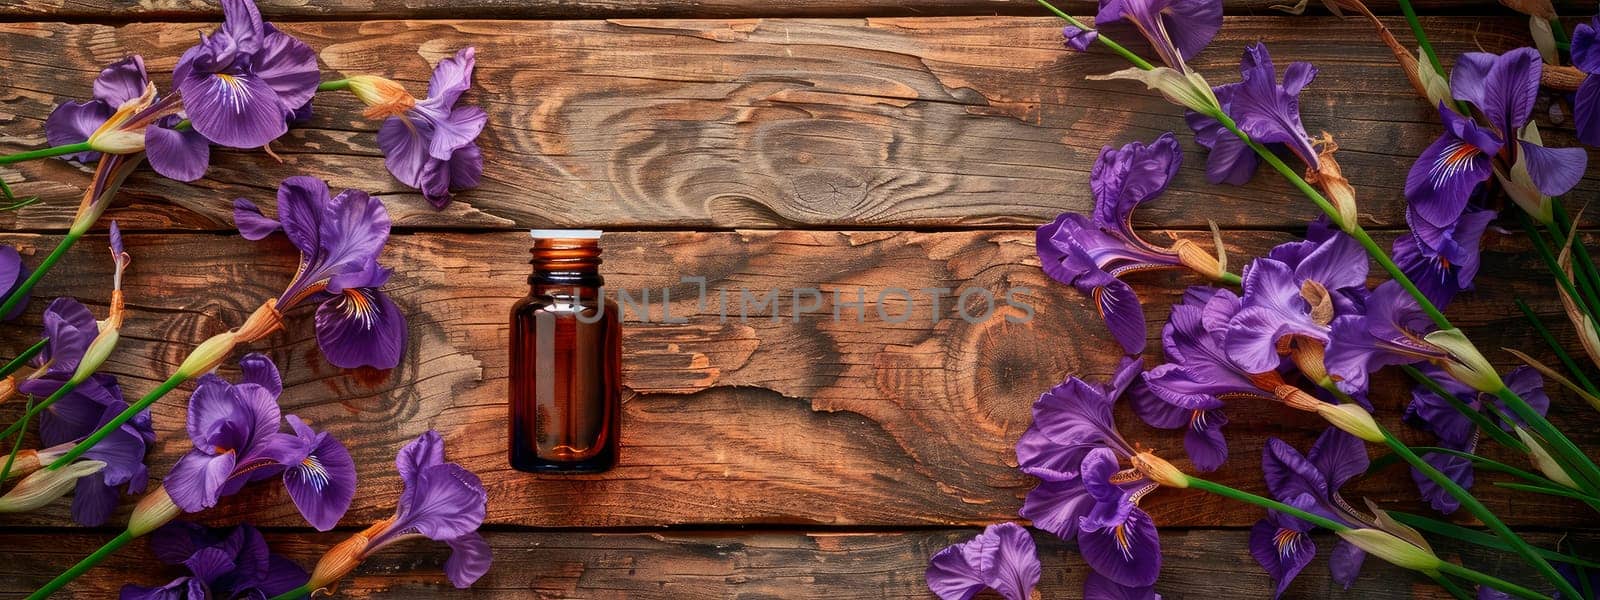 iris essential oil in a bottle. Selective focus. Nature.